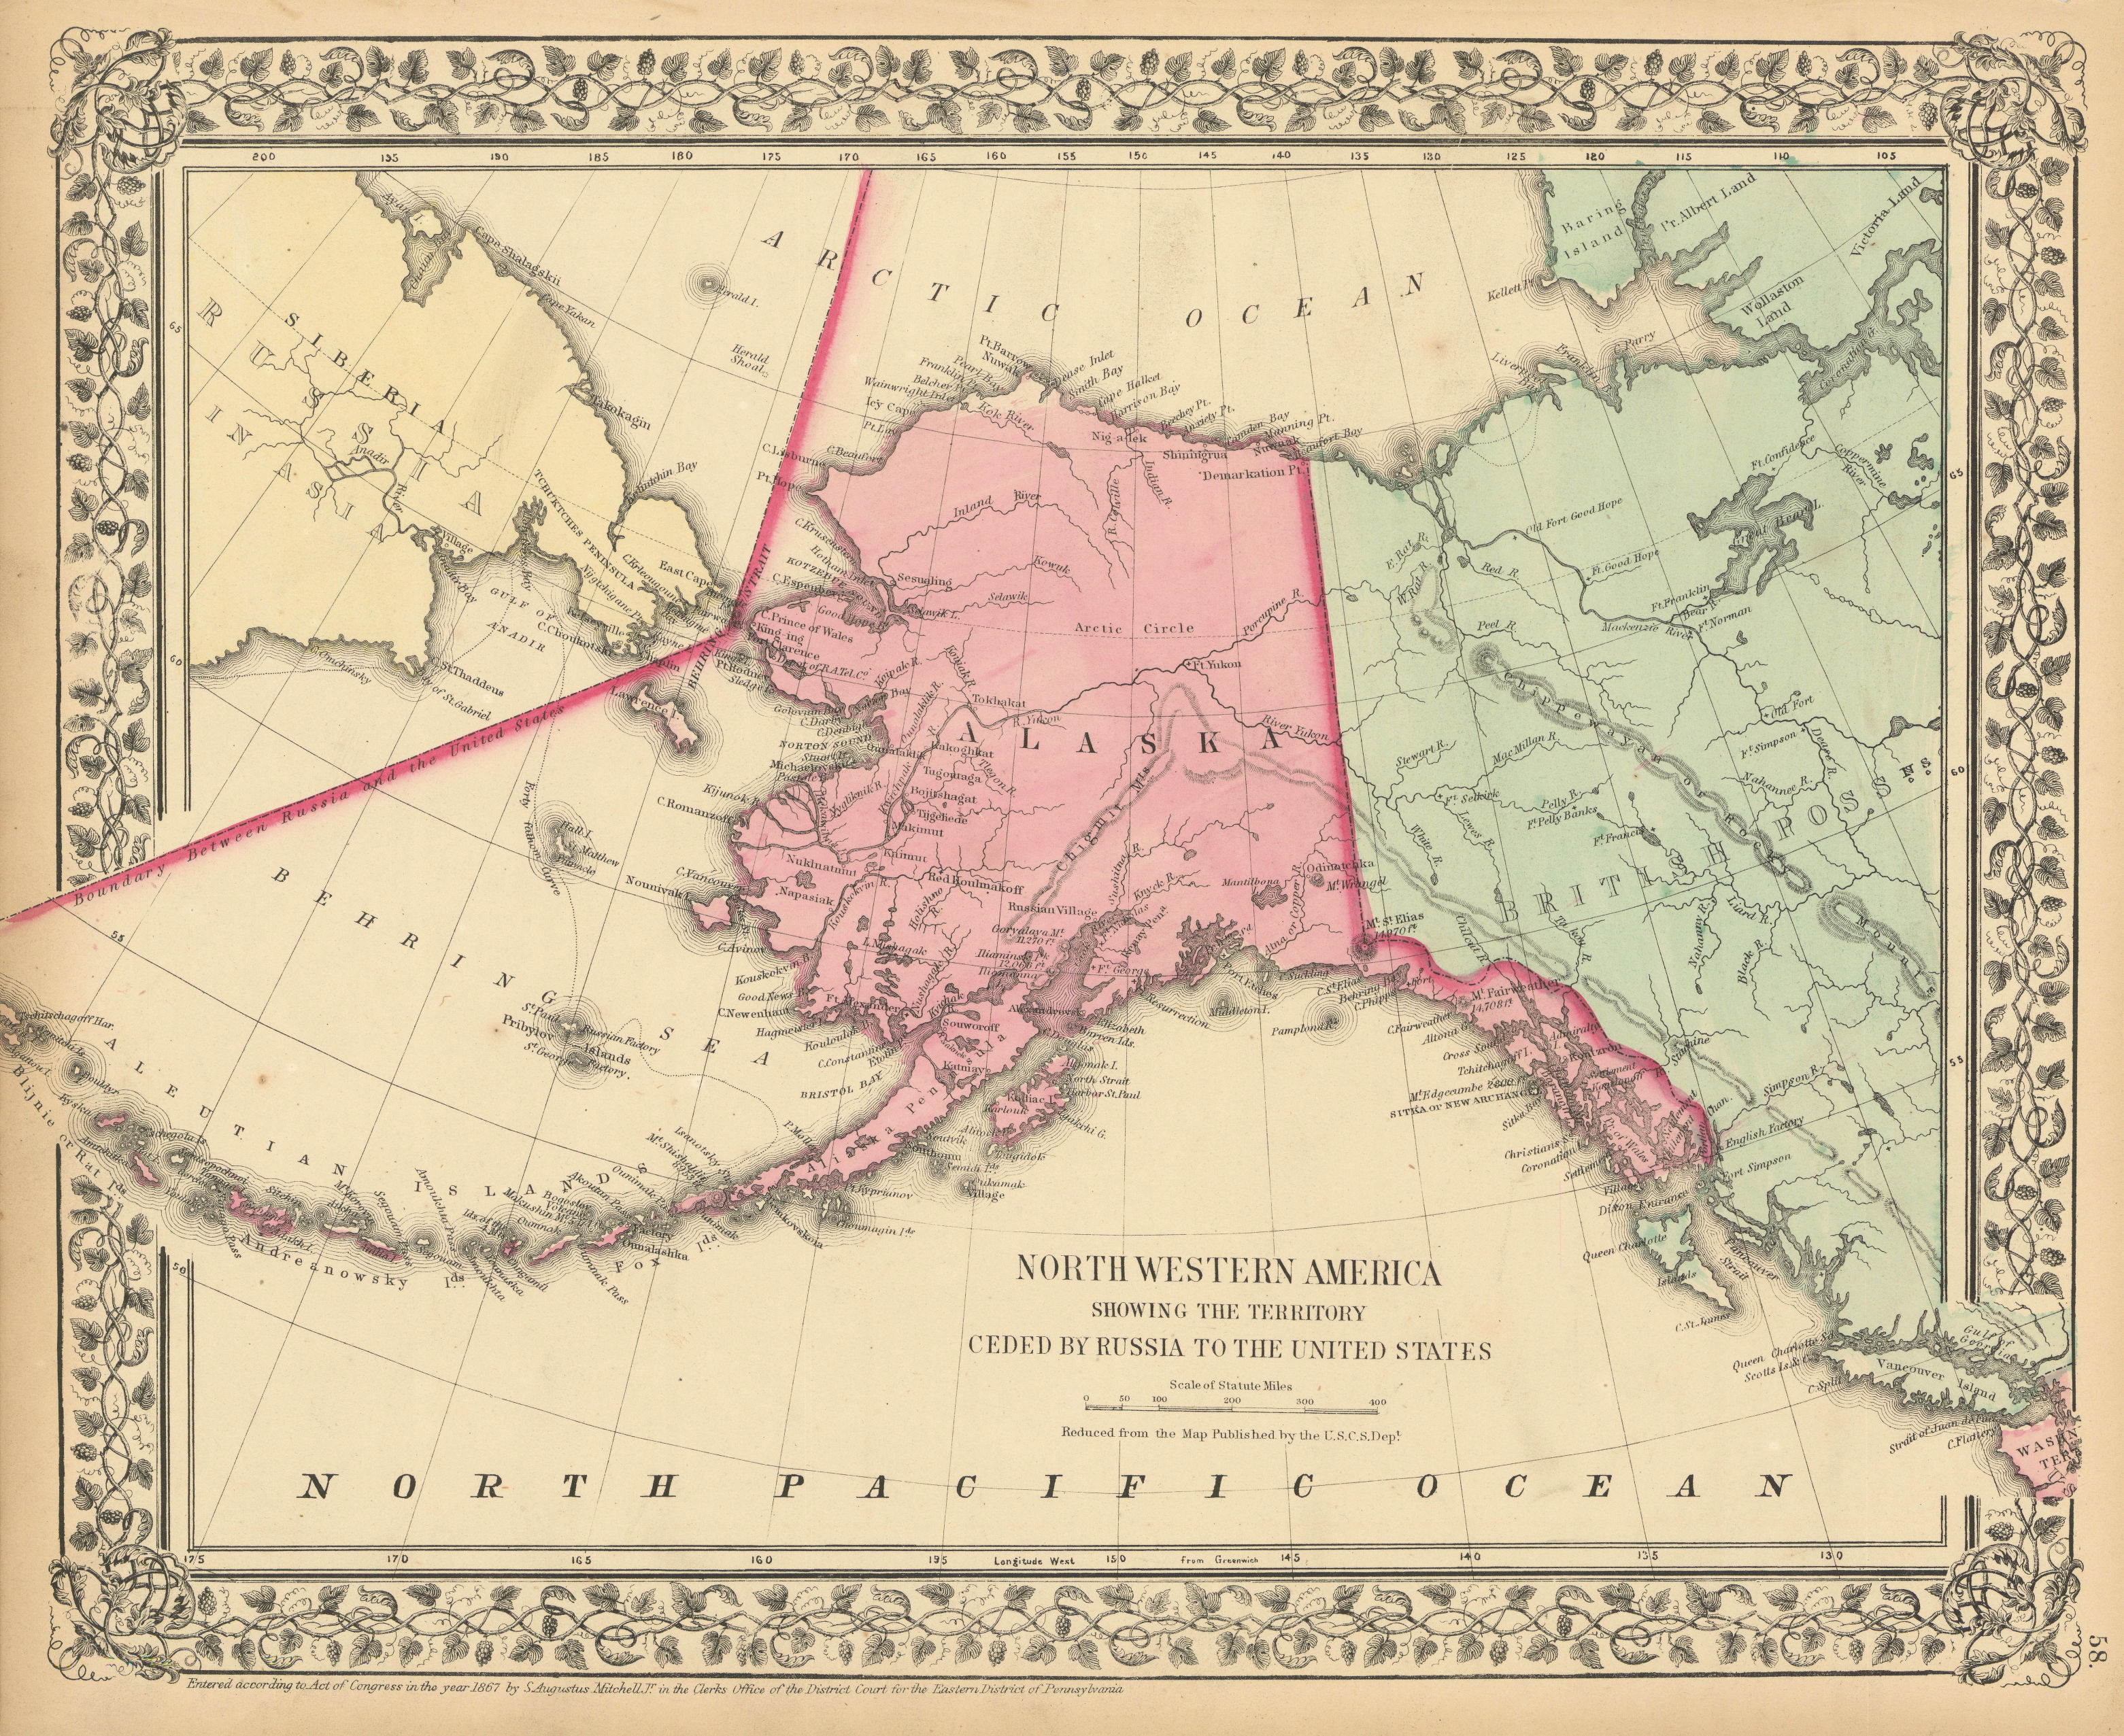 Northwestern America showing… Territory ceded by Russia Alaska MITCHELL 1869 map